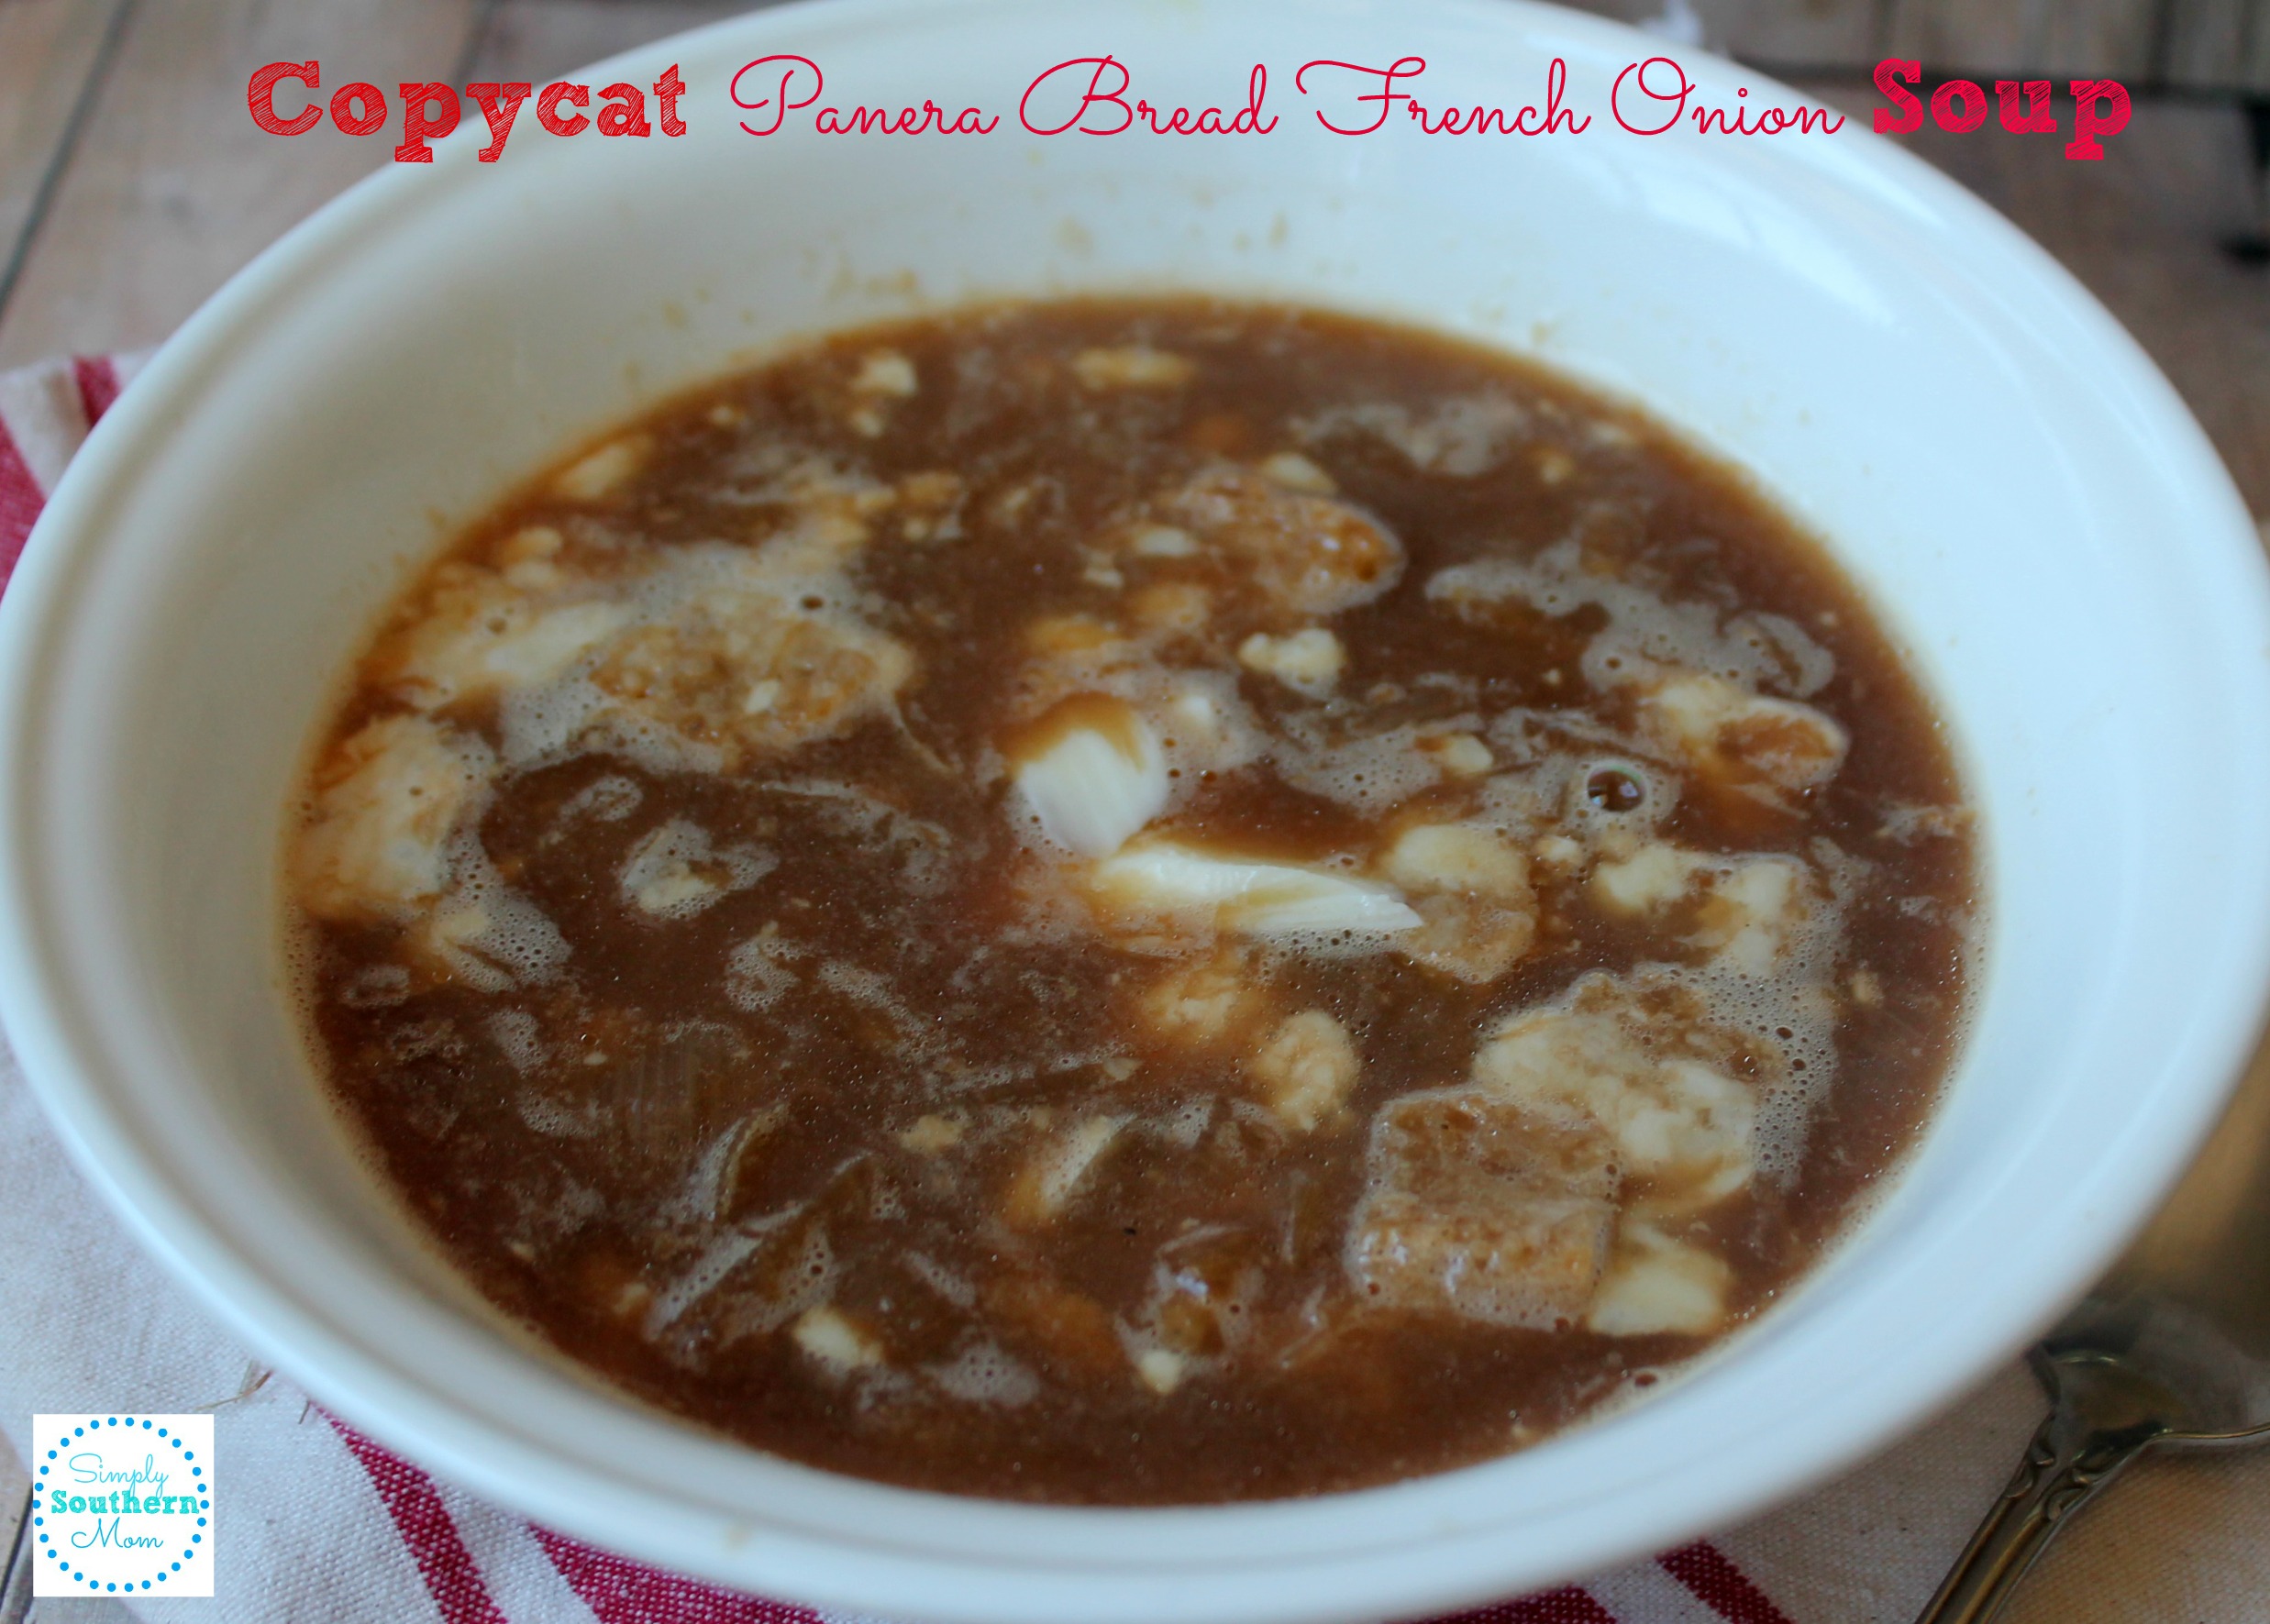 https://www.simplysouthernmom.com/wp-content/uploads/2014/01/Copycat-Panera-Bread-French-Onion-Soup-2.jpg